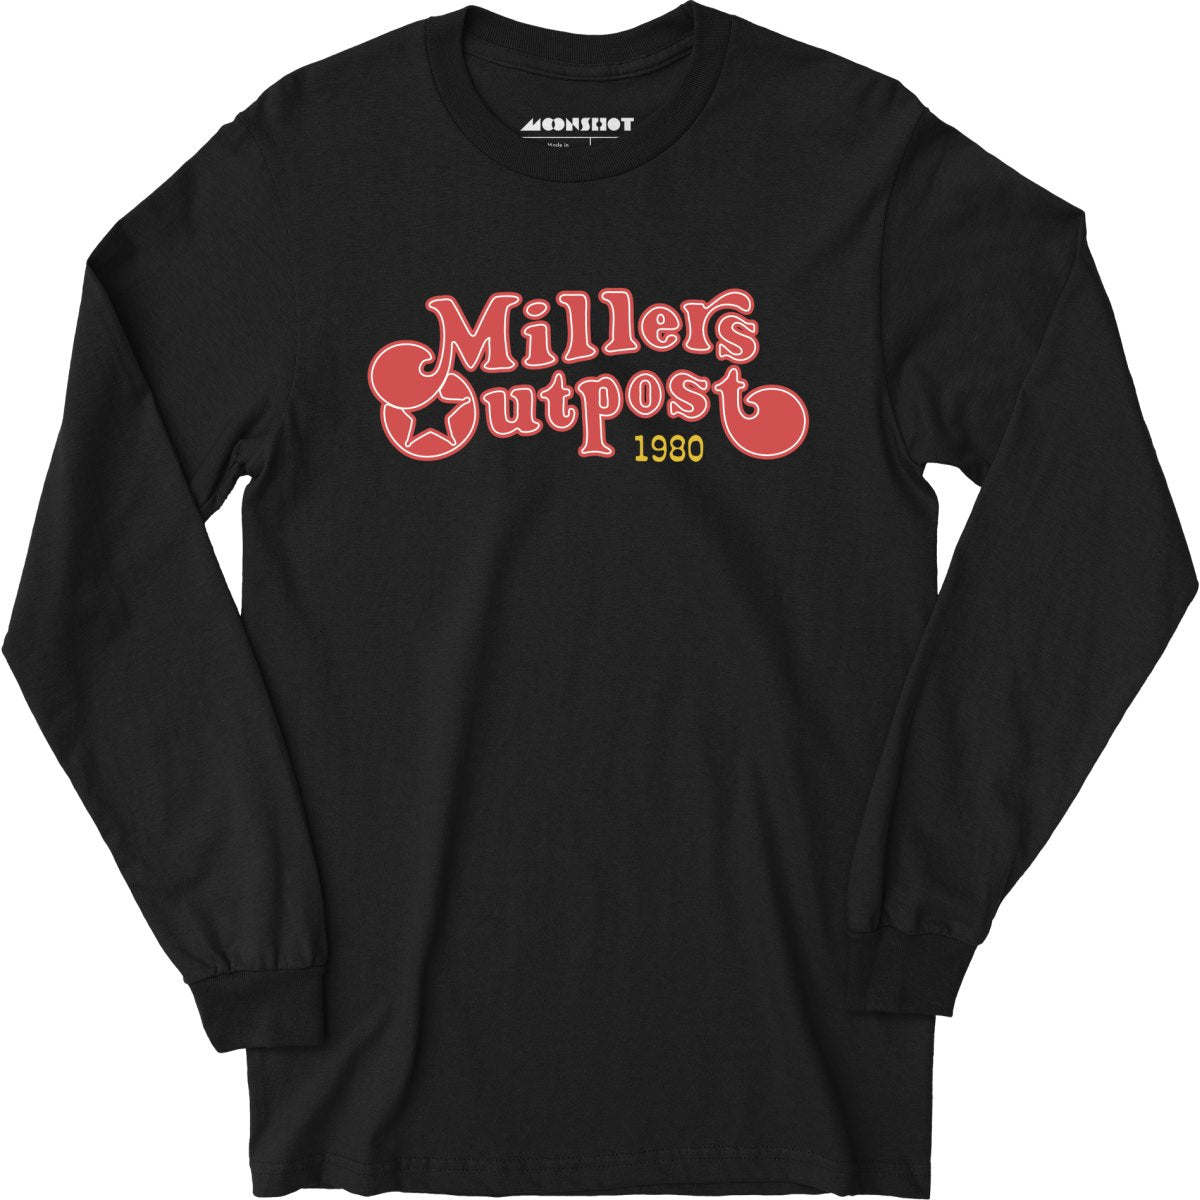 MILLER'S OUTPOST T-SHIRT - Defunct Clothing Company - Black